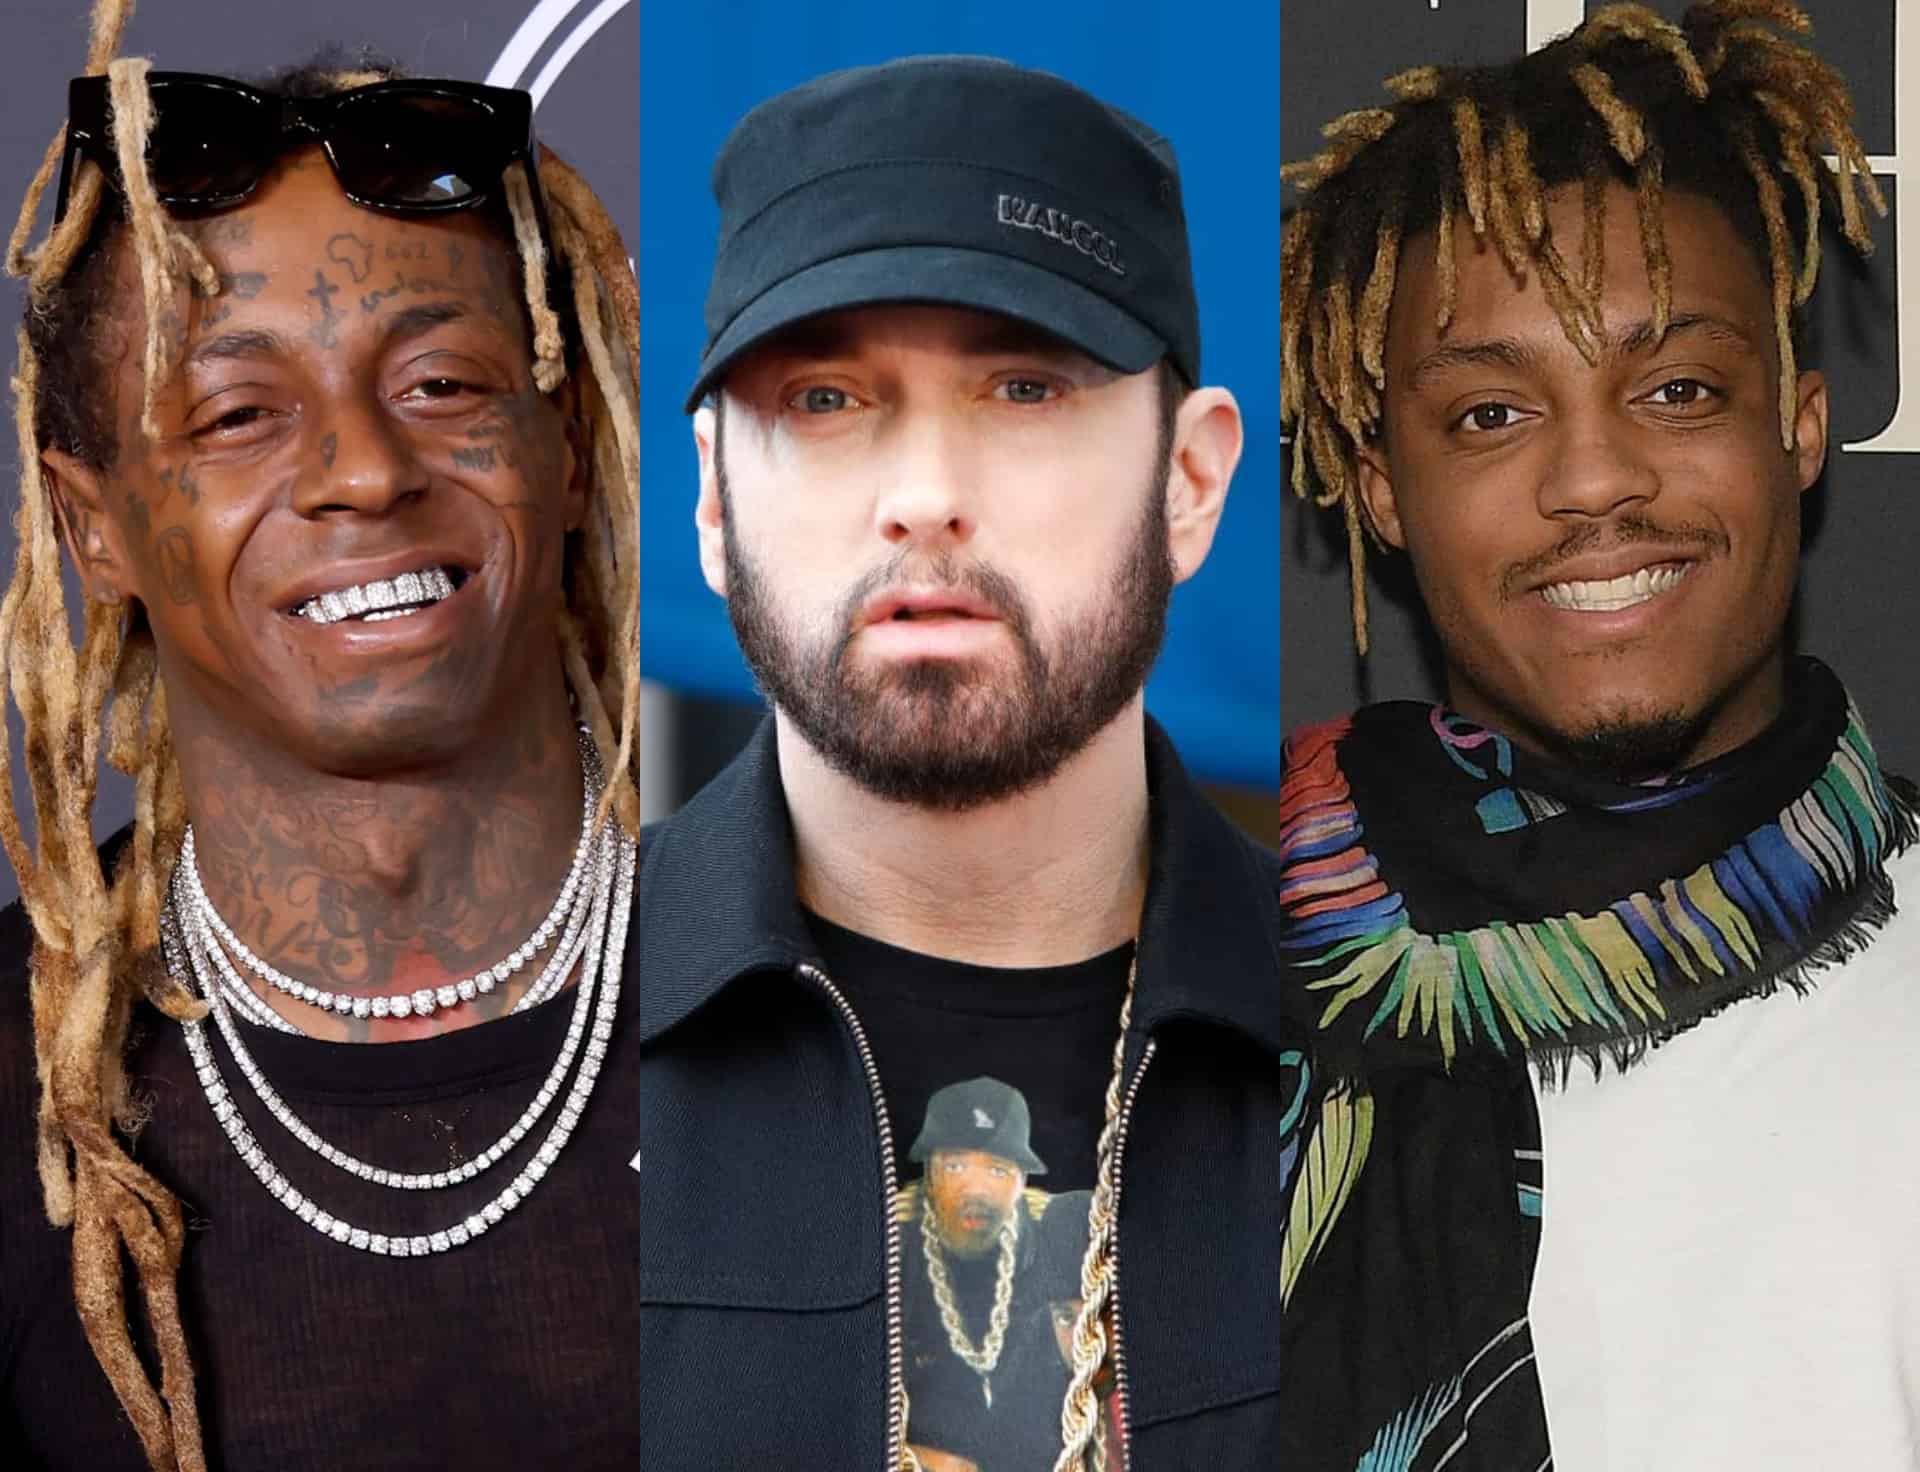 Lil Wayne Reacts To Juice WRLD & Eminem's New Song Lace It